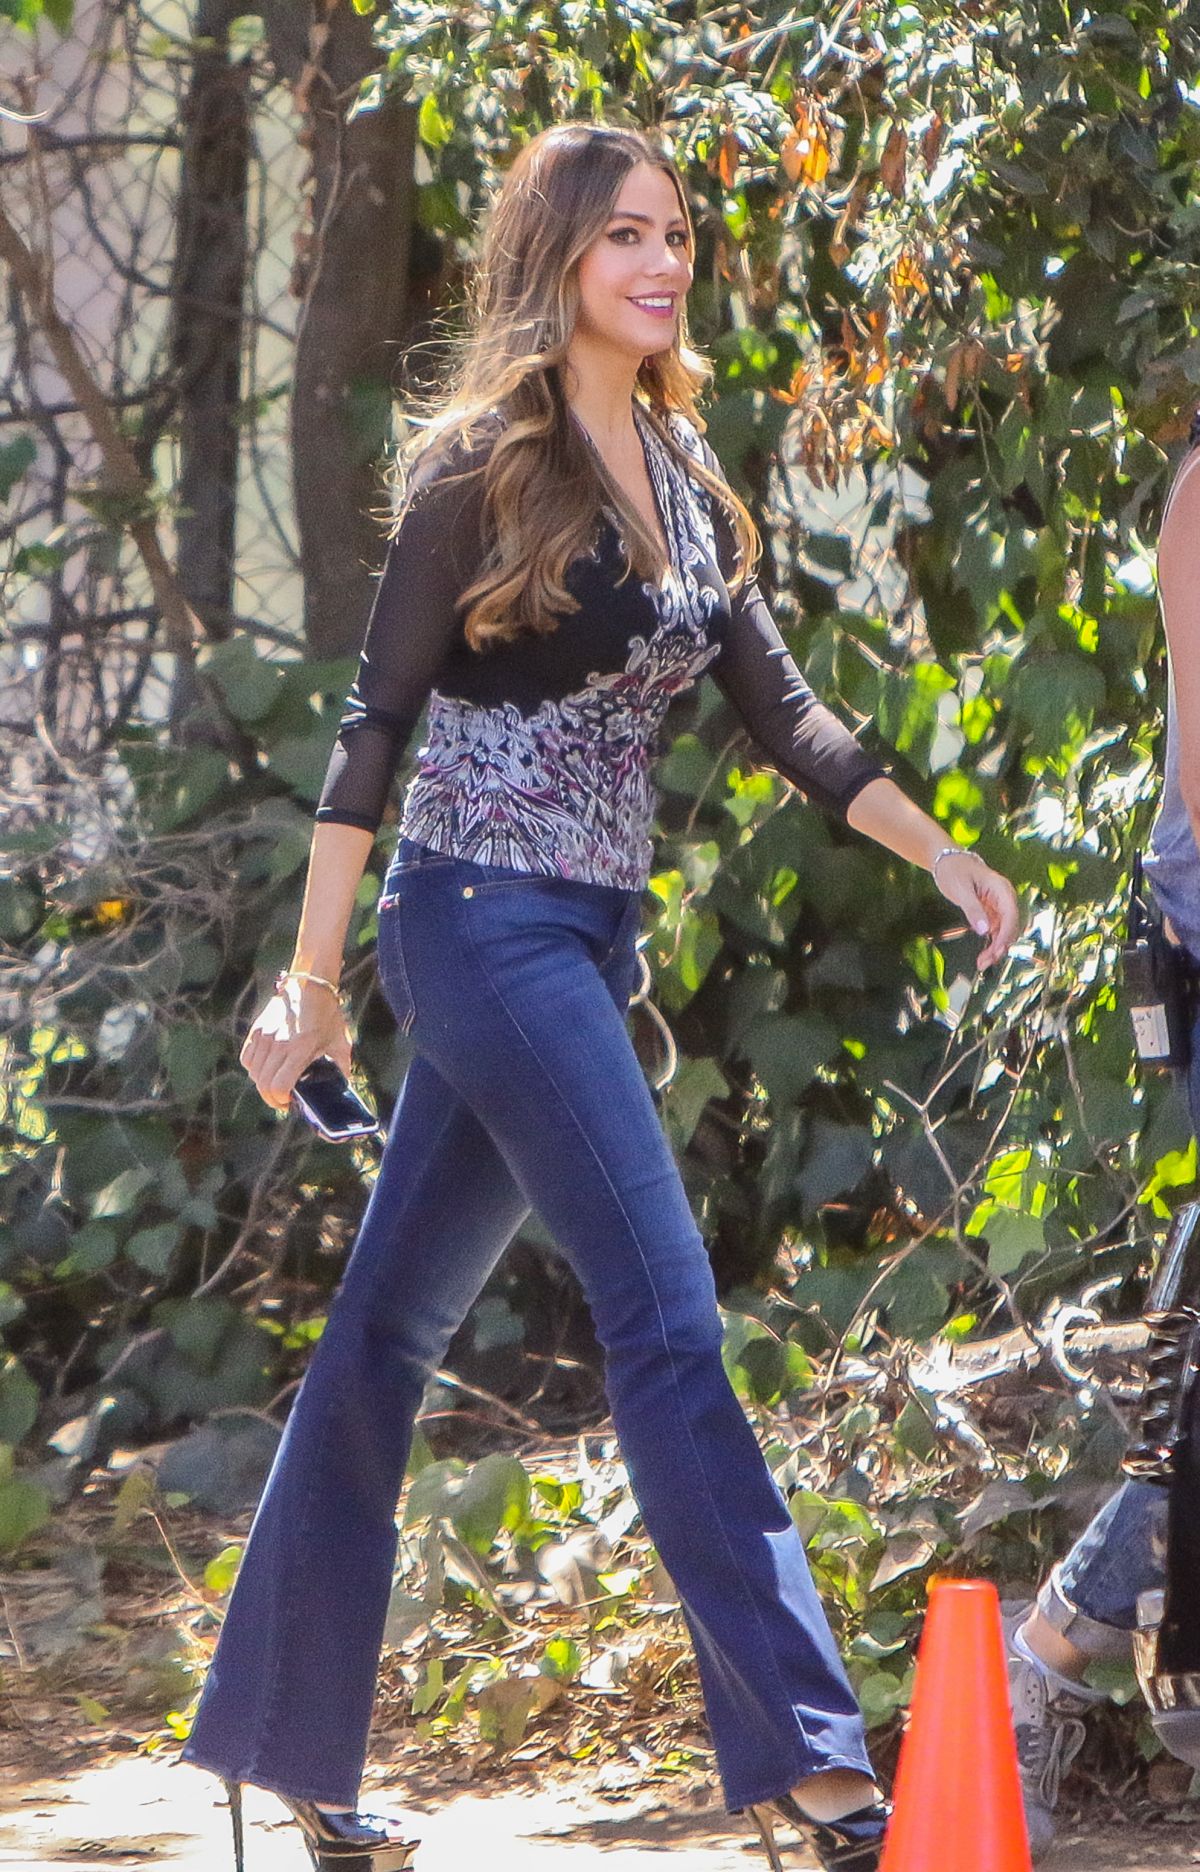 sofia-vergara-on-the-set-of-modern-family-in-los-angeles-08-11